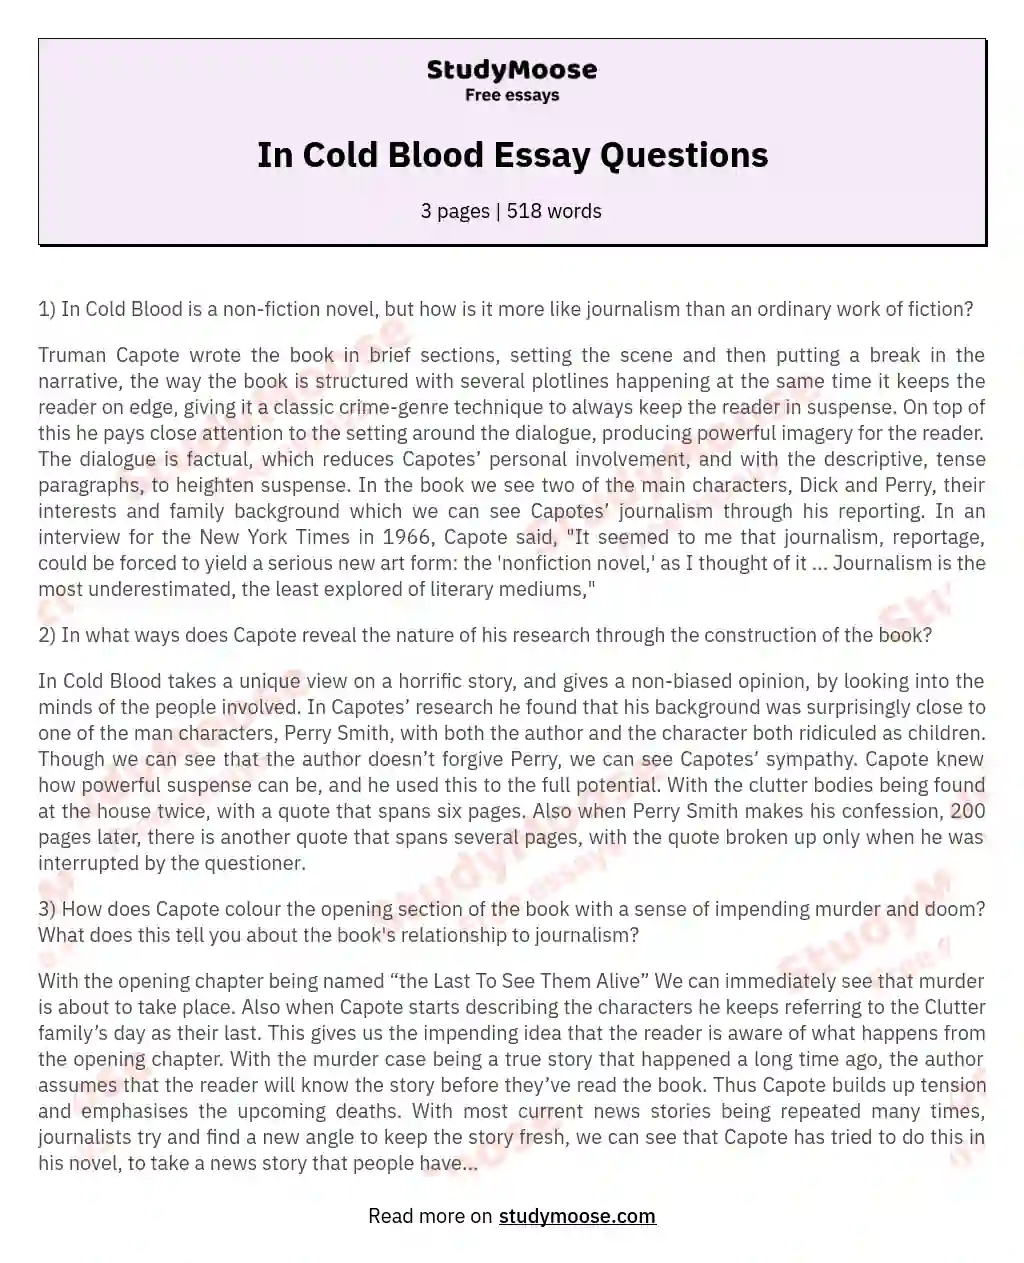 In Cold Blood Essay Questions